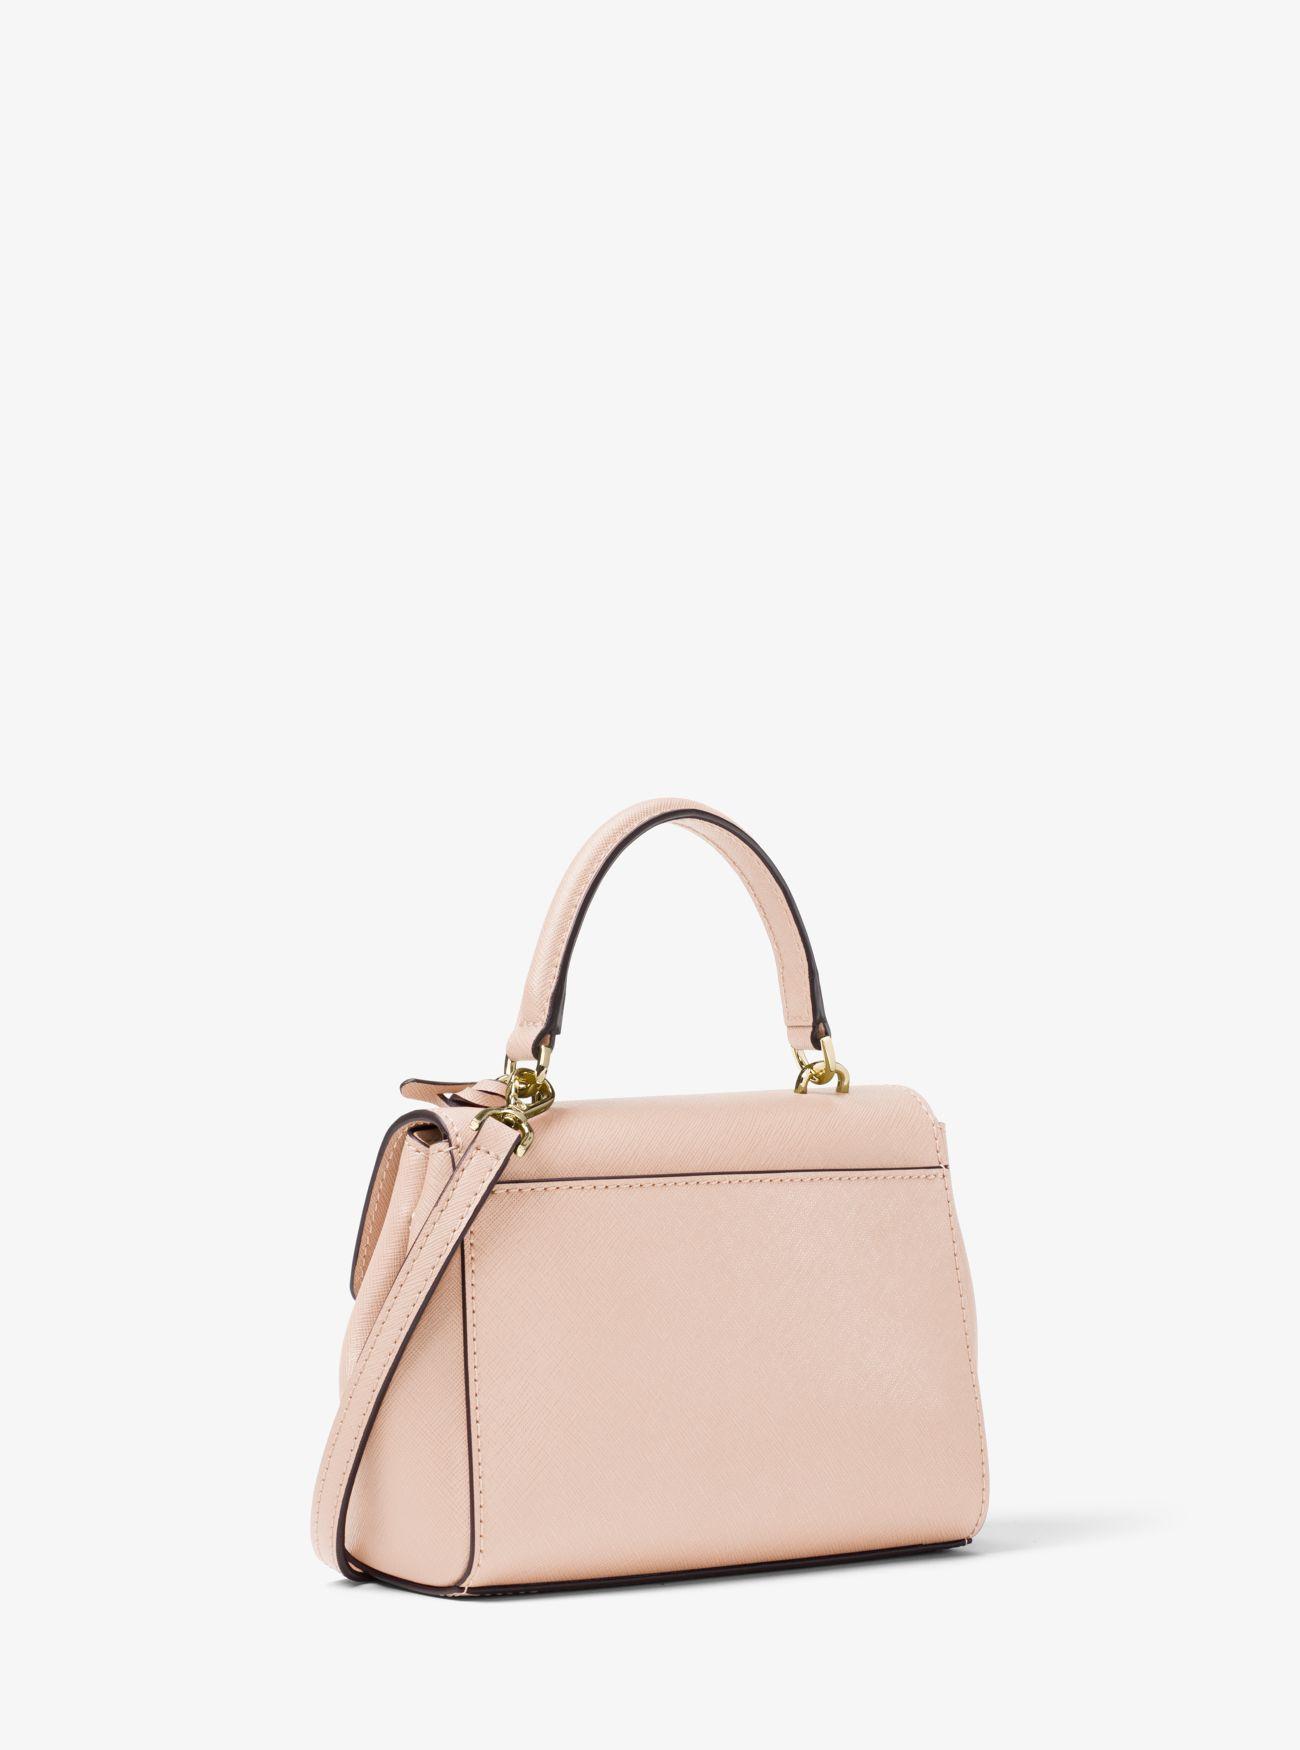 Michael kors Ava bag in blush pink saffiano leather